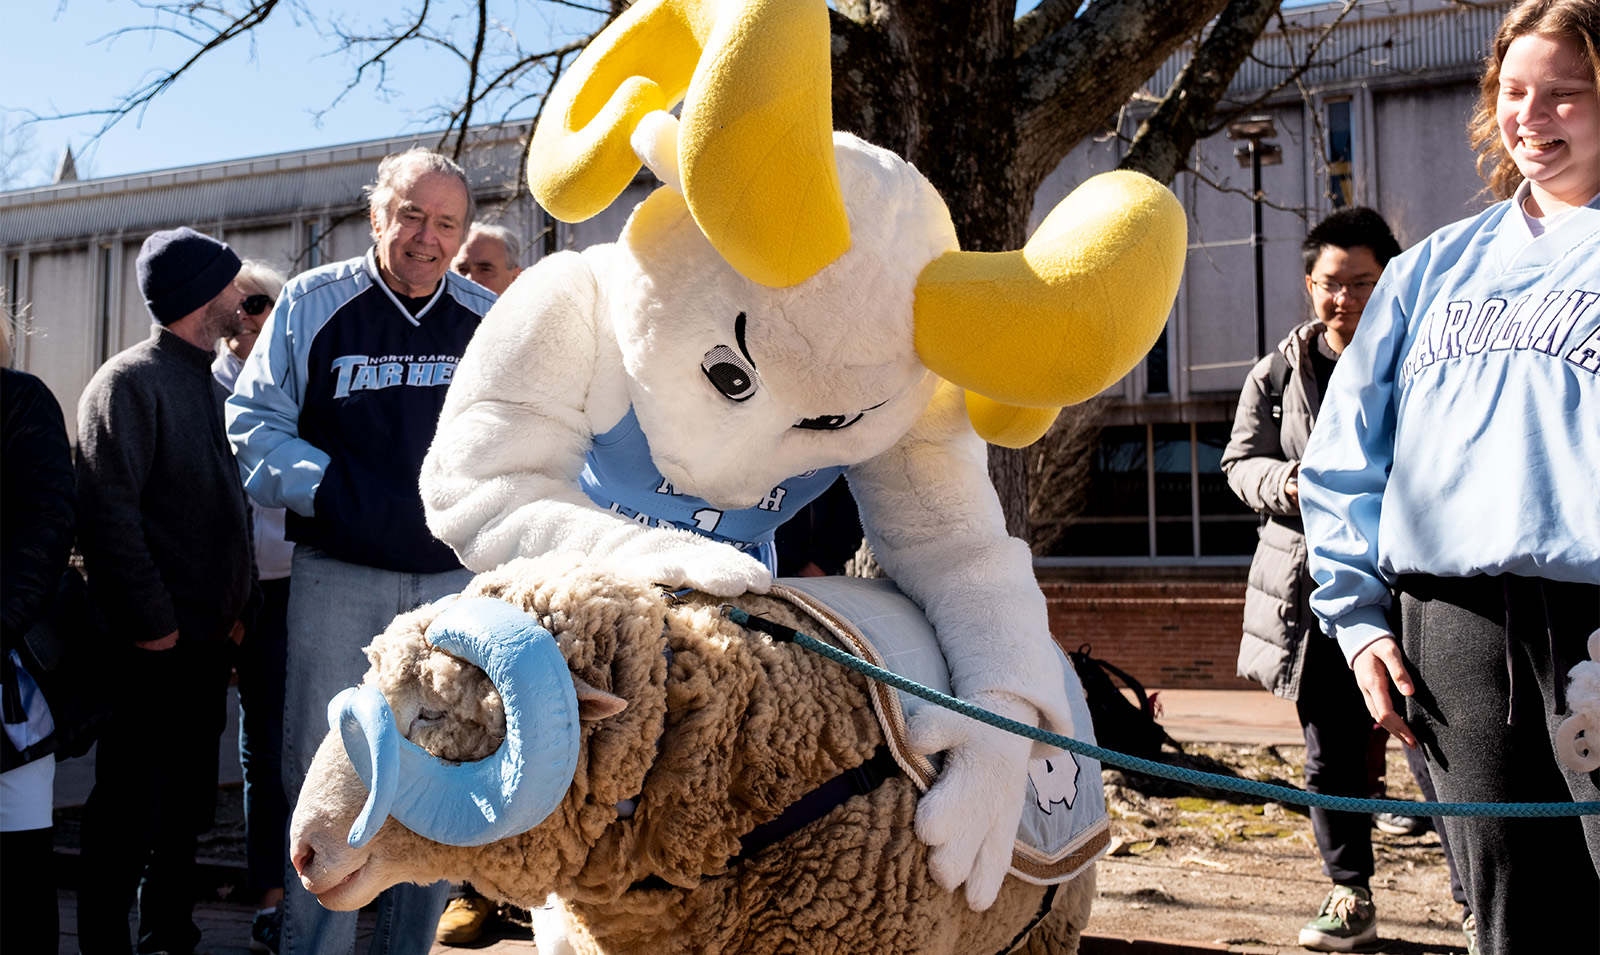 A Ram mascot, Rameses, petting a live Ram, also named Rameses, at the Pit on the campus of UNC-Chapel Hill.